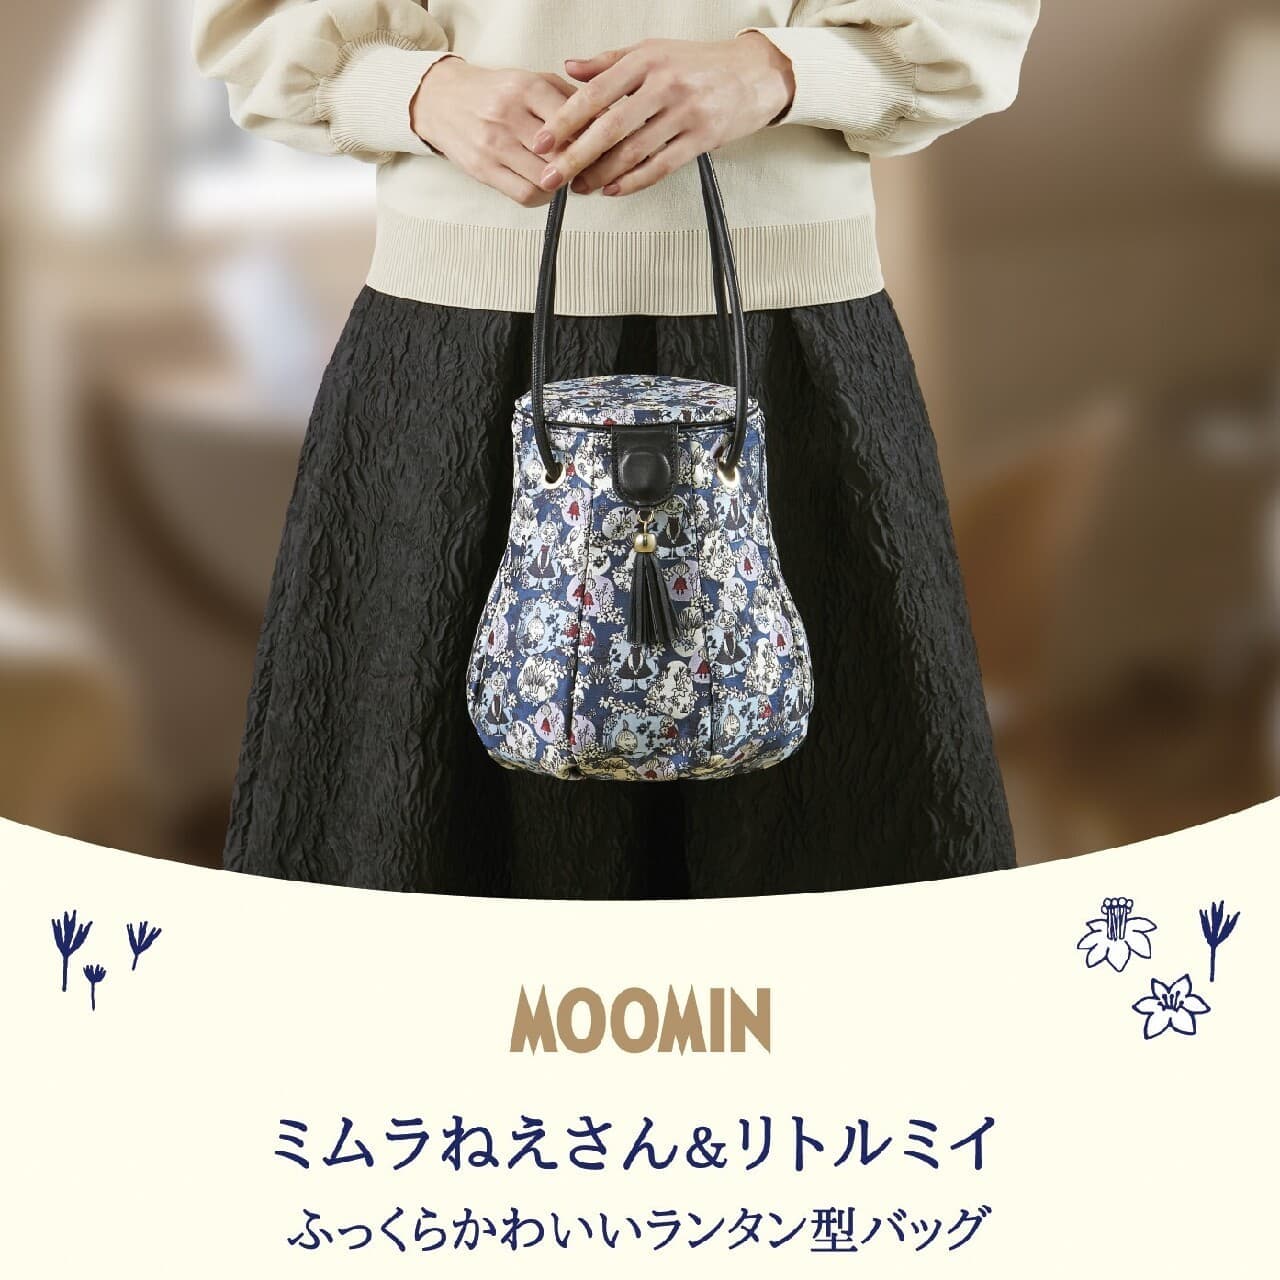 Moomin “Mimura Nee-san & Little My Plump and Cute Lantern-shaped Bag” is now available from Imperial Enterprises Image 2